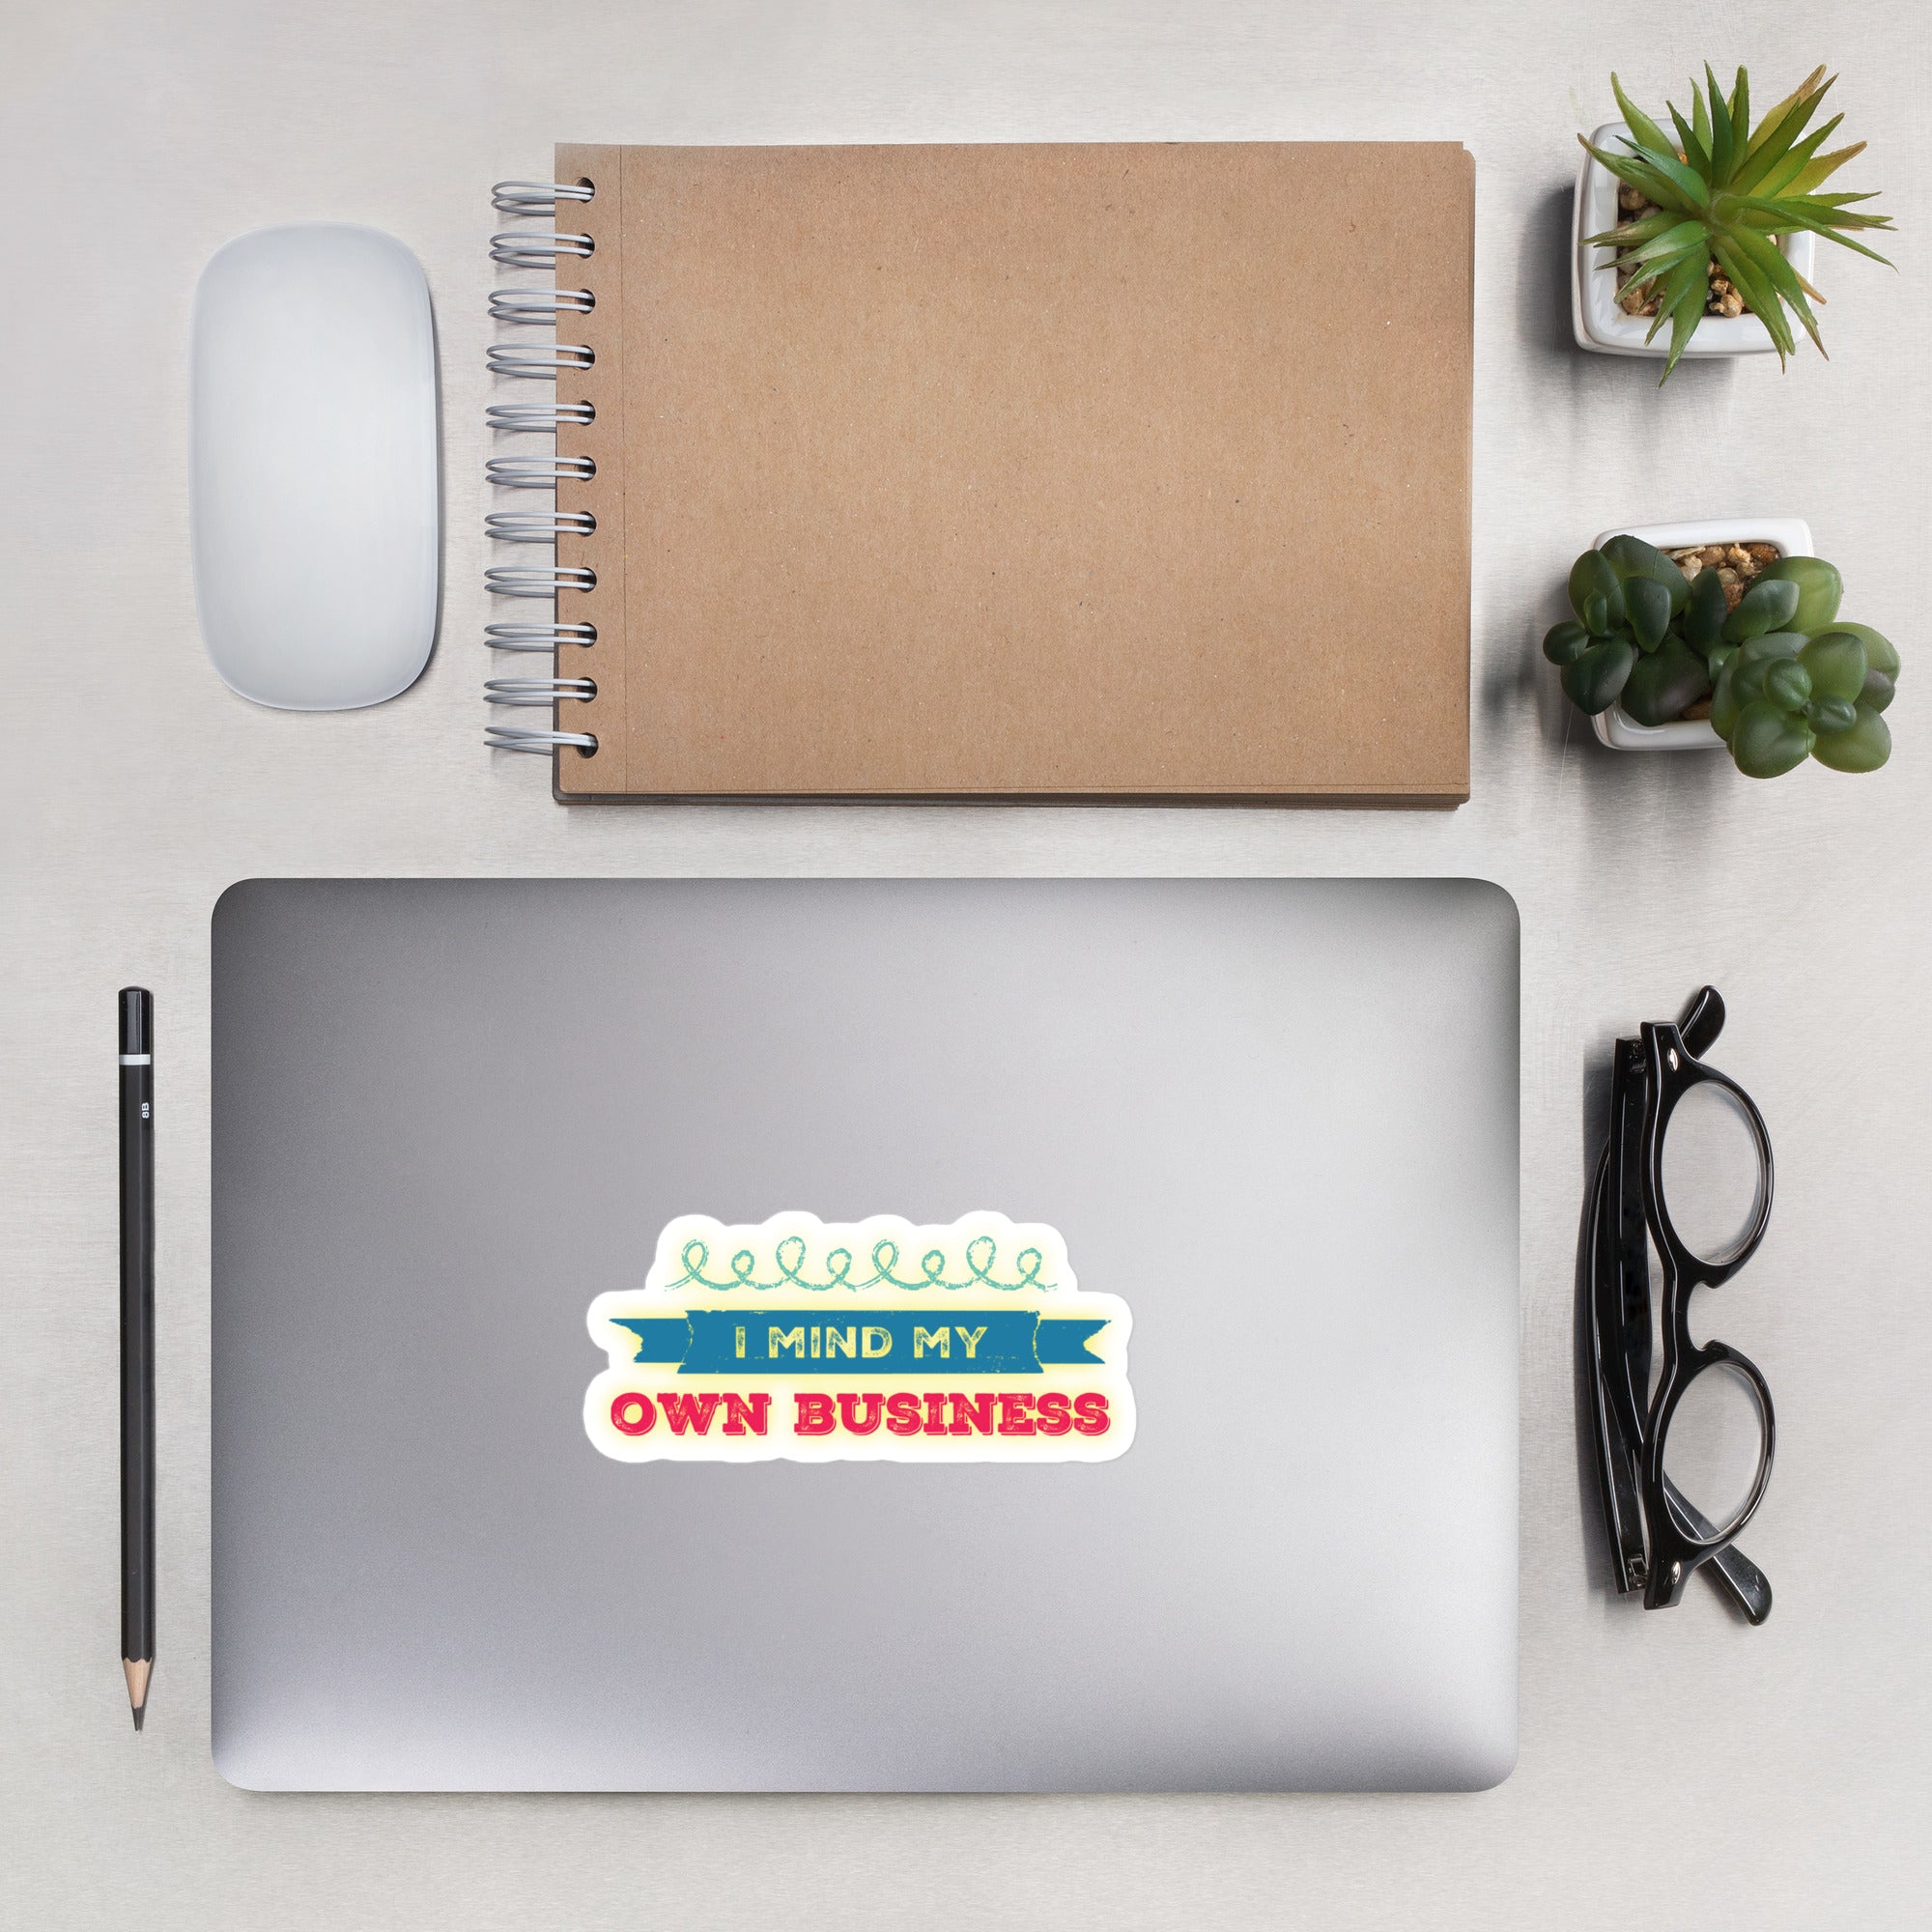 GloWell Designs - Bubble-Free Stickers - Affirmation Quote - I Mind My Own Business - GloWell Designs